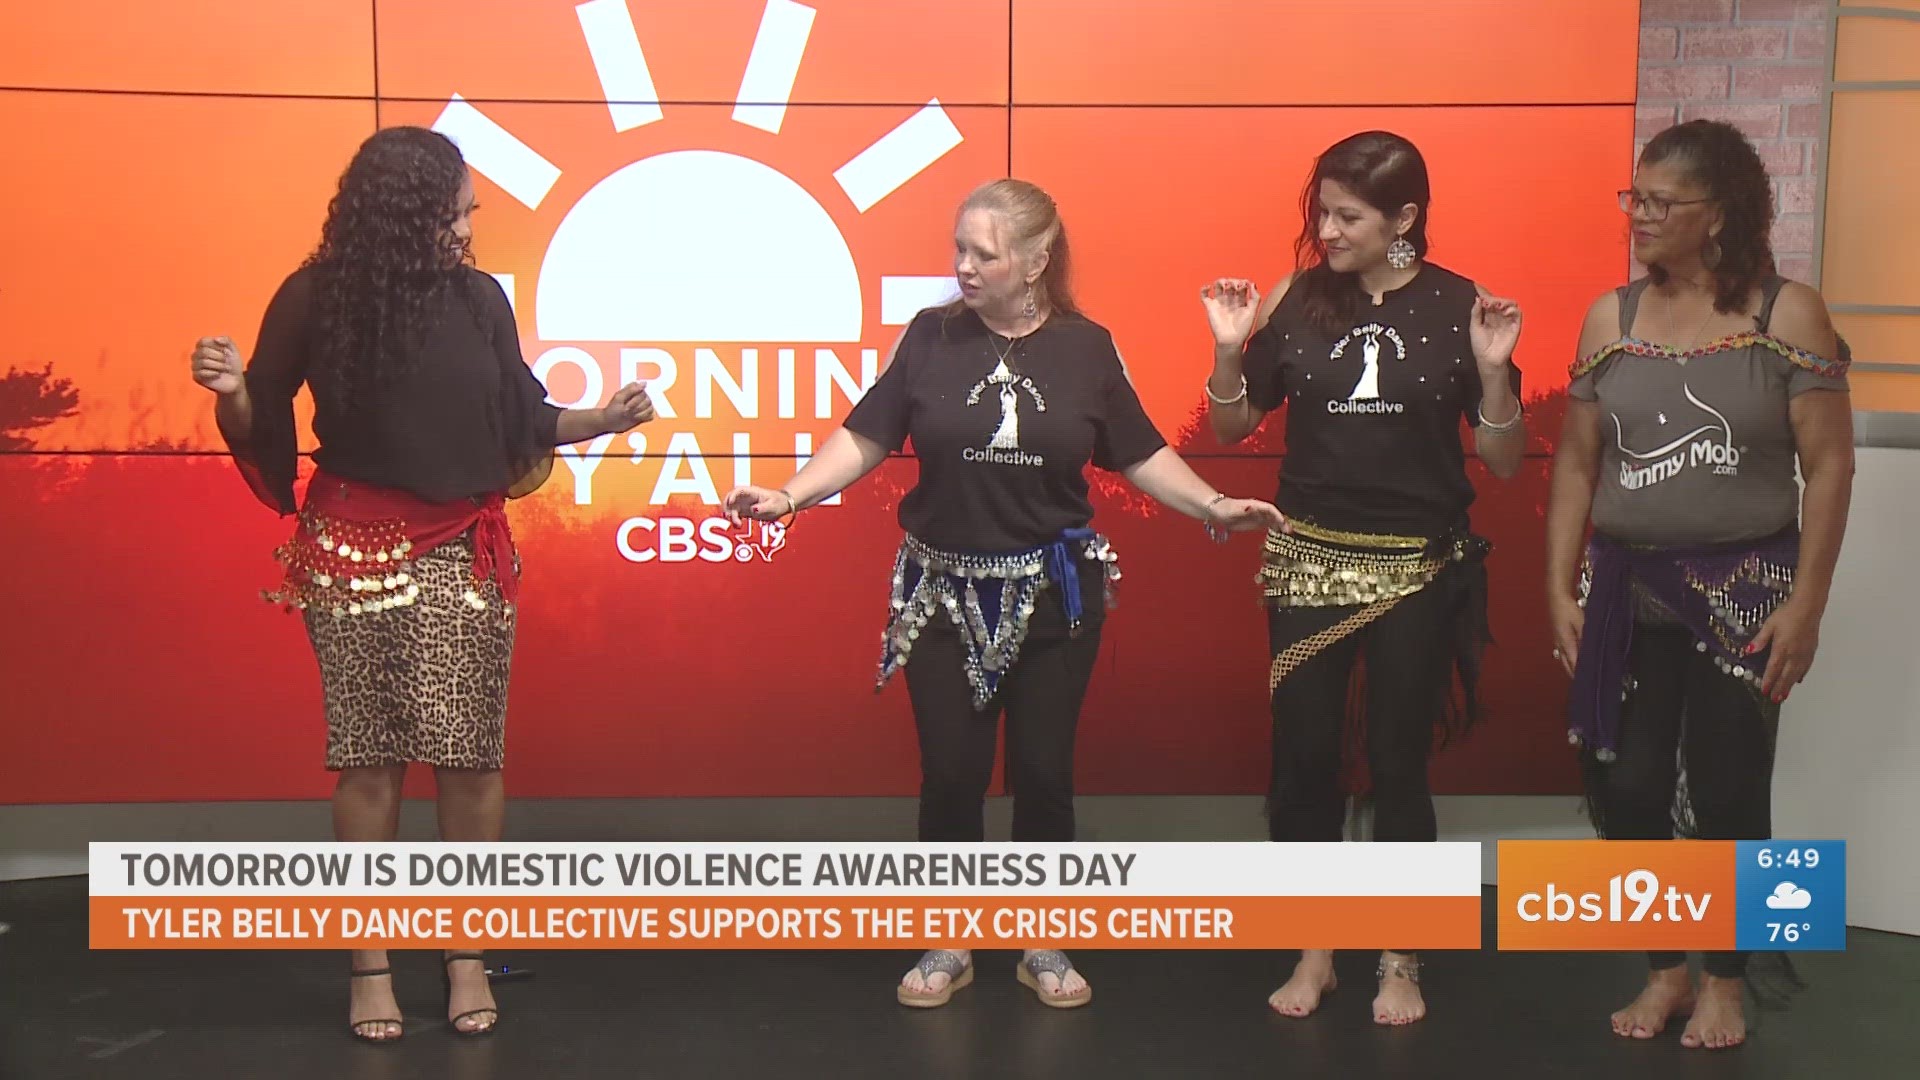 The collective is hosting a "Shimmy Mob" to raise money for domestic violence victims.